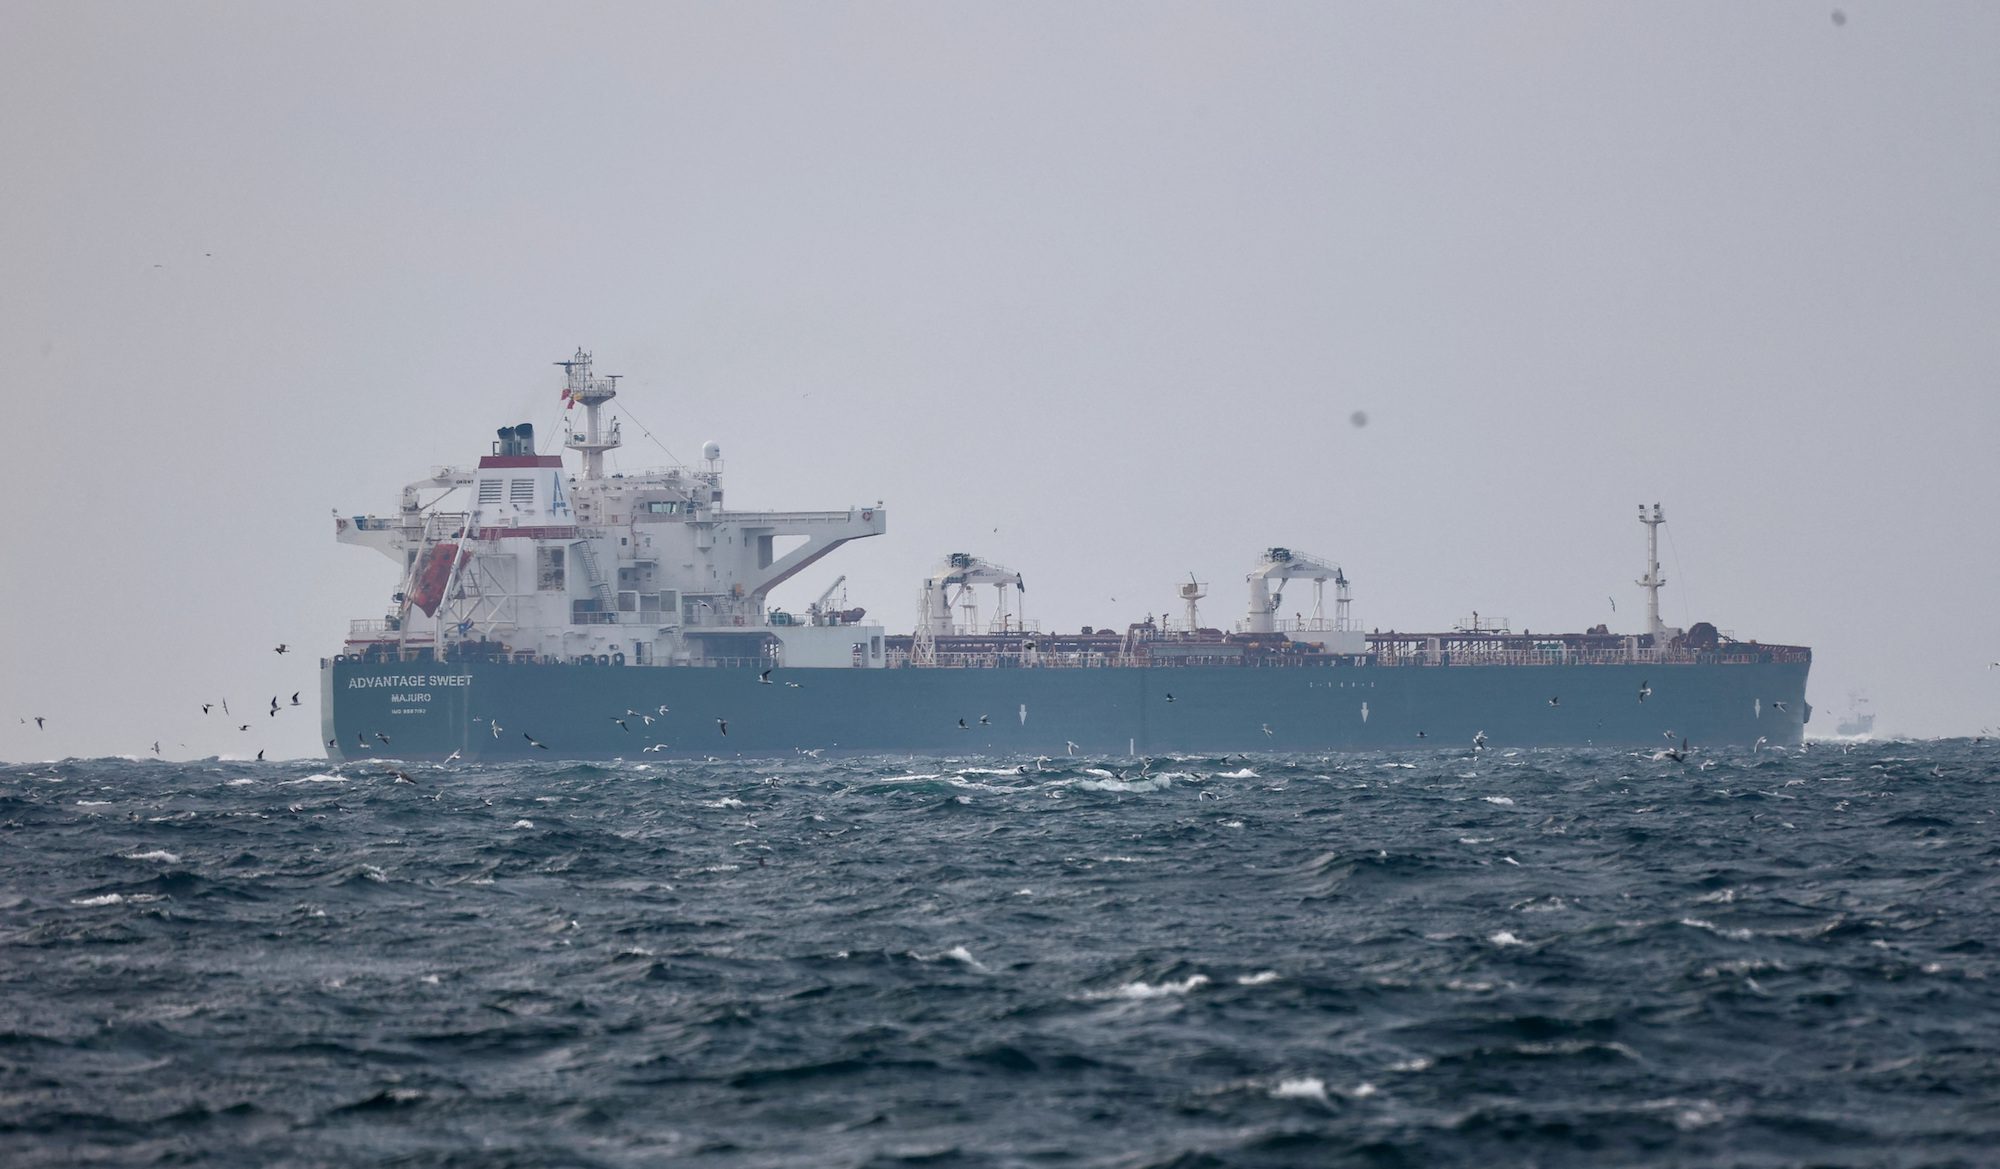 U.S. May Unload Oil From Seized Iranian Vessel Off Texas